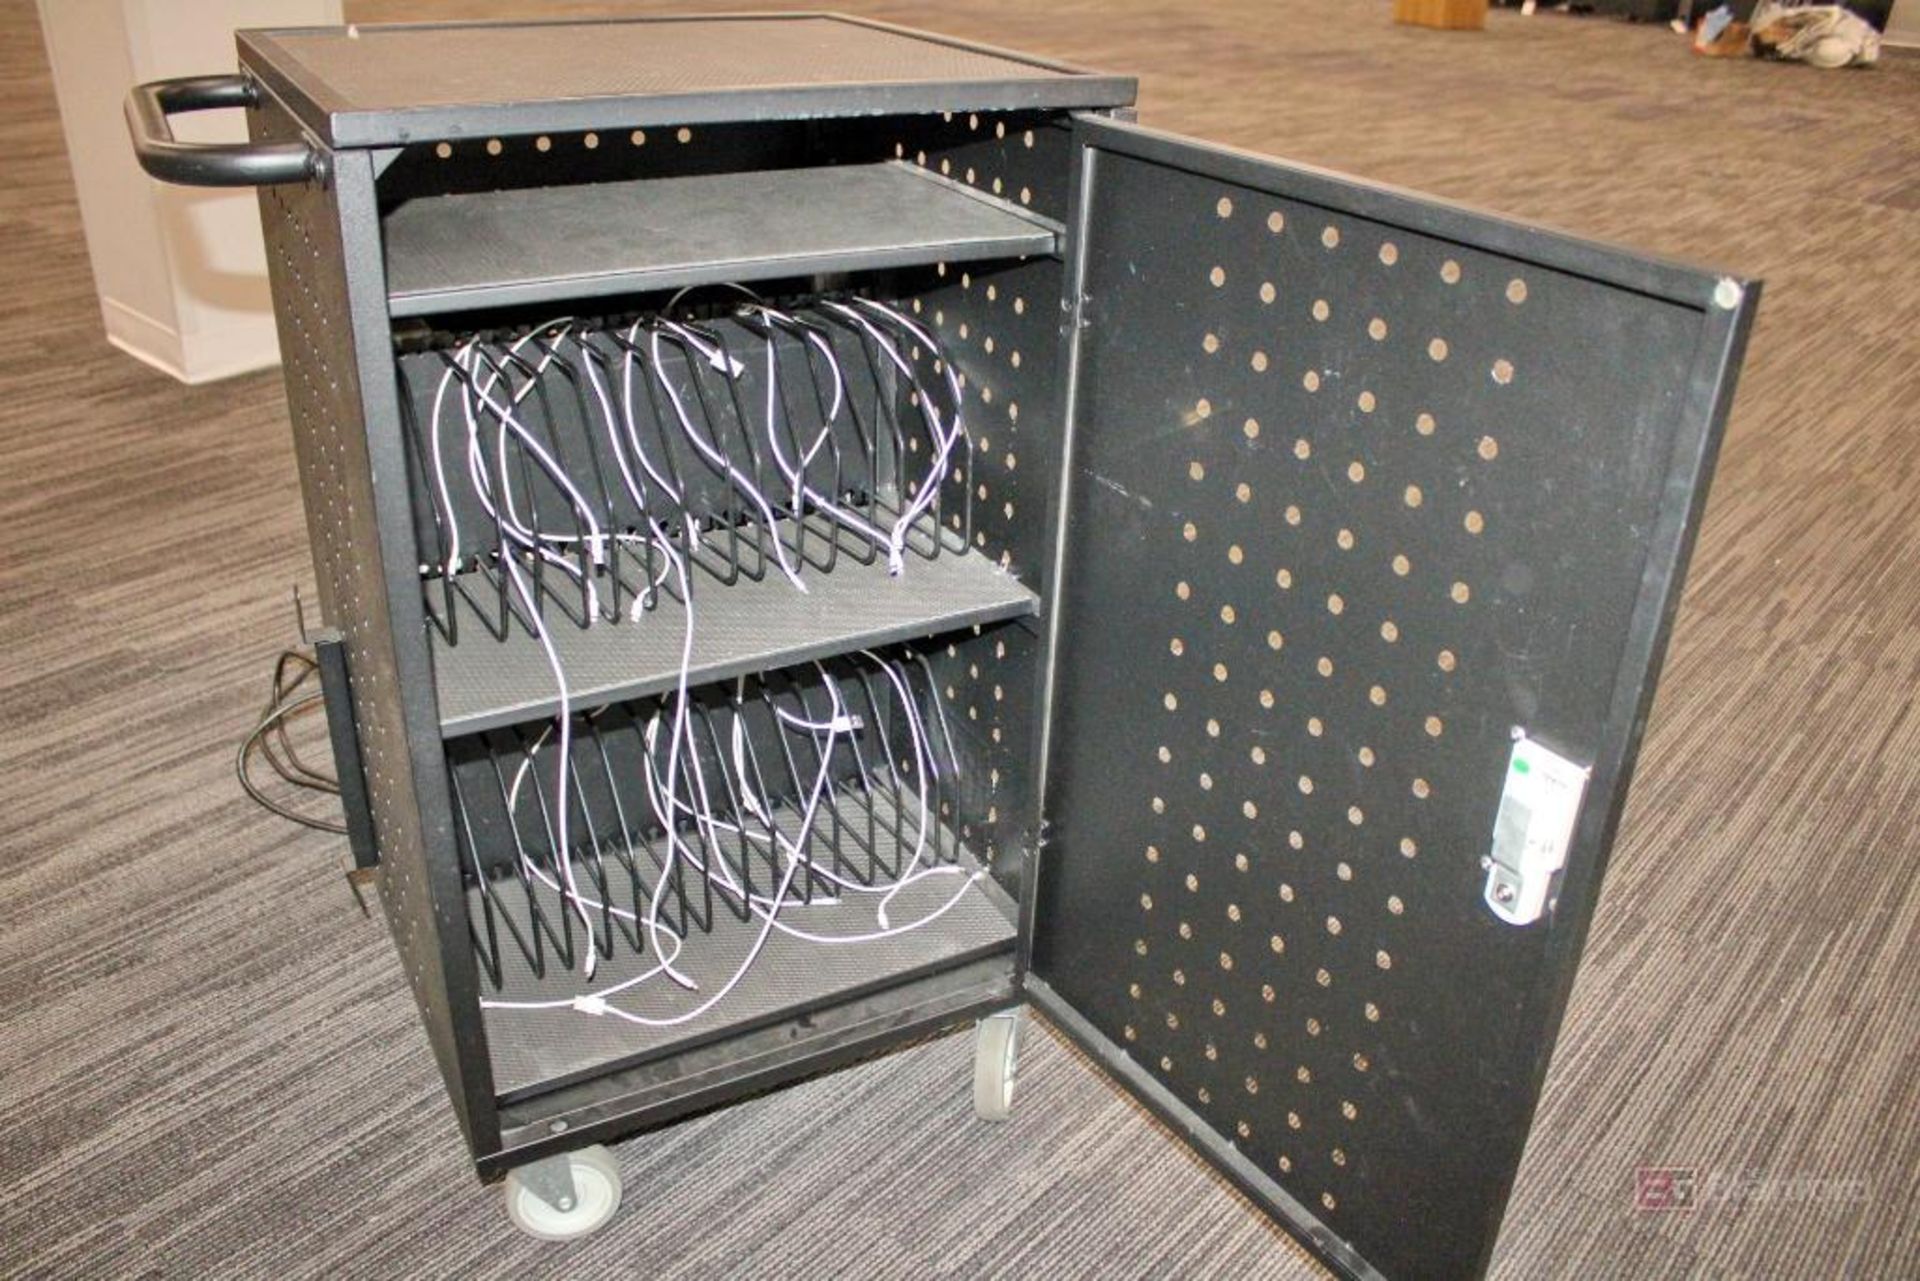 30 Device Mobile Charging/Storage Cart for iPads, Charging Station - Image 2 of 4